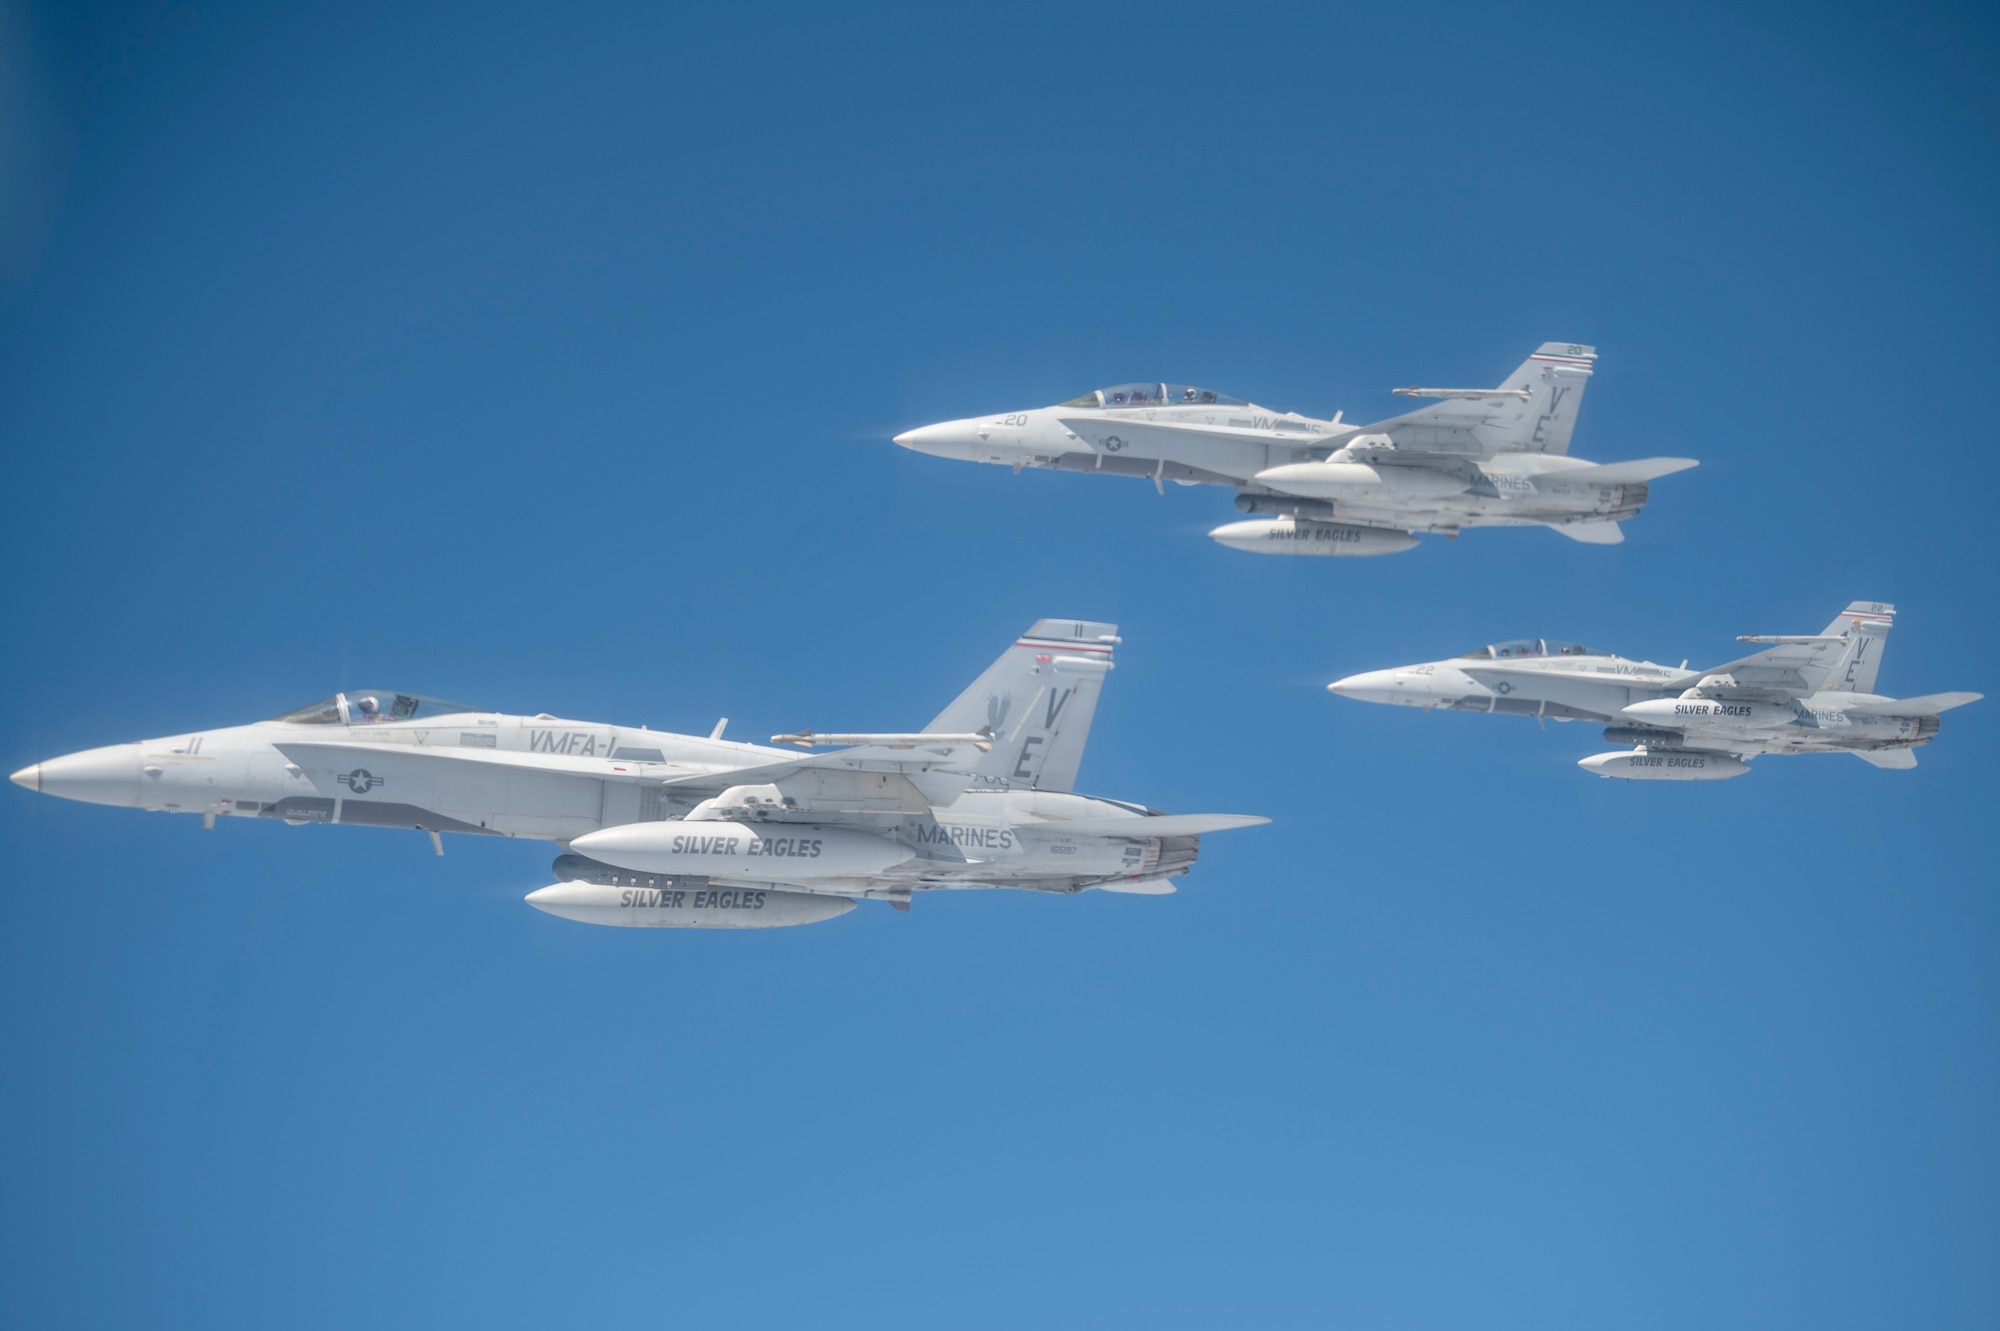 F/A-18s assigned to Marine Fighter Attack Squadron 115 “Silver Eagles” from Marine Corps Air Station Beaufort, South Carolina, fly in formation during an aerial refueling operation off the coast of North Carolina following Exercise Razor Talon May 19, 2022. The Silver Eagles were aerial refueled on their way back to Marine Corps Air Station Beaufort. (U.S. Air Force photo by Senior Airman Kevin Holloway)